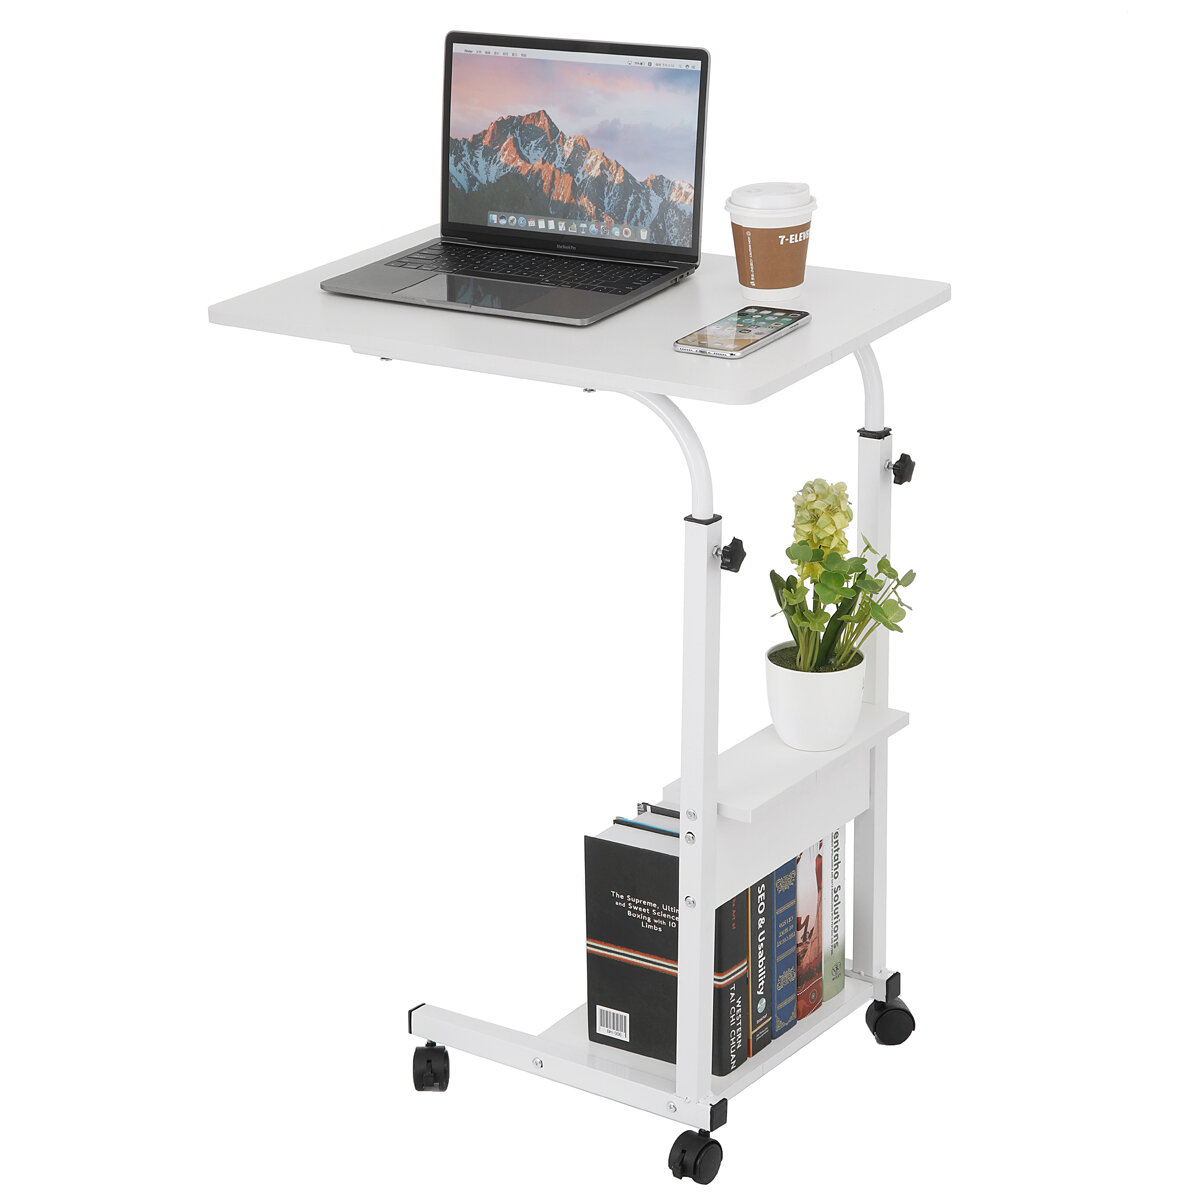 Movable Laptop Desk Adjustable Height Computer Notebook Desk Writing Study Table Bedside Tray with 2 Storage Shelves Hom